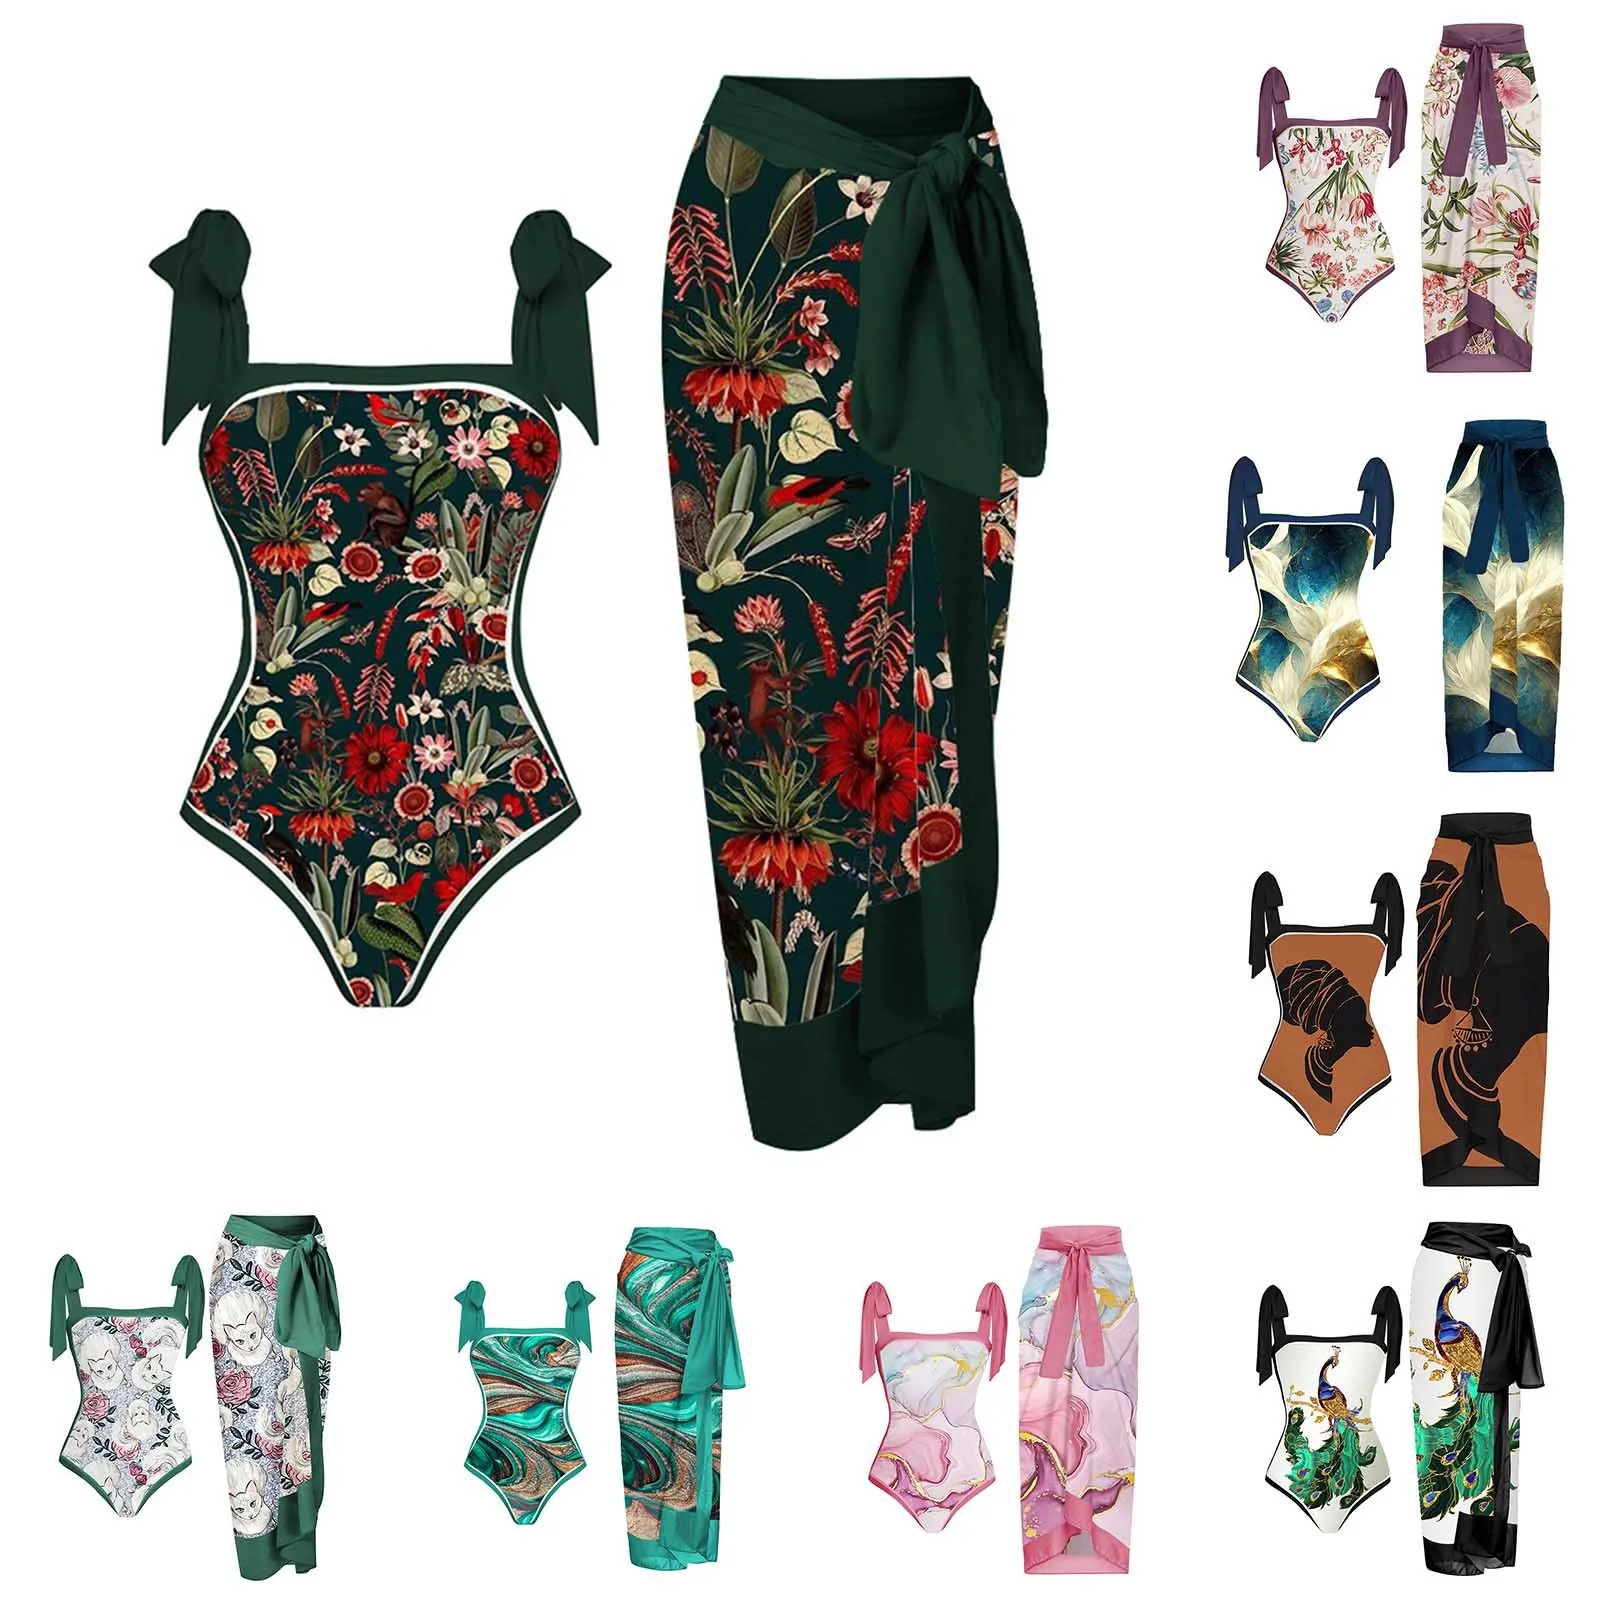 

Women Vintage Colorblock Abstract Floral Print 1 Piece Swimwear+1 Piece Cover UP Two Piece Vintage Print Swimsuit Sexy Swimsuit